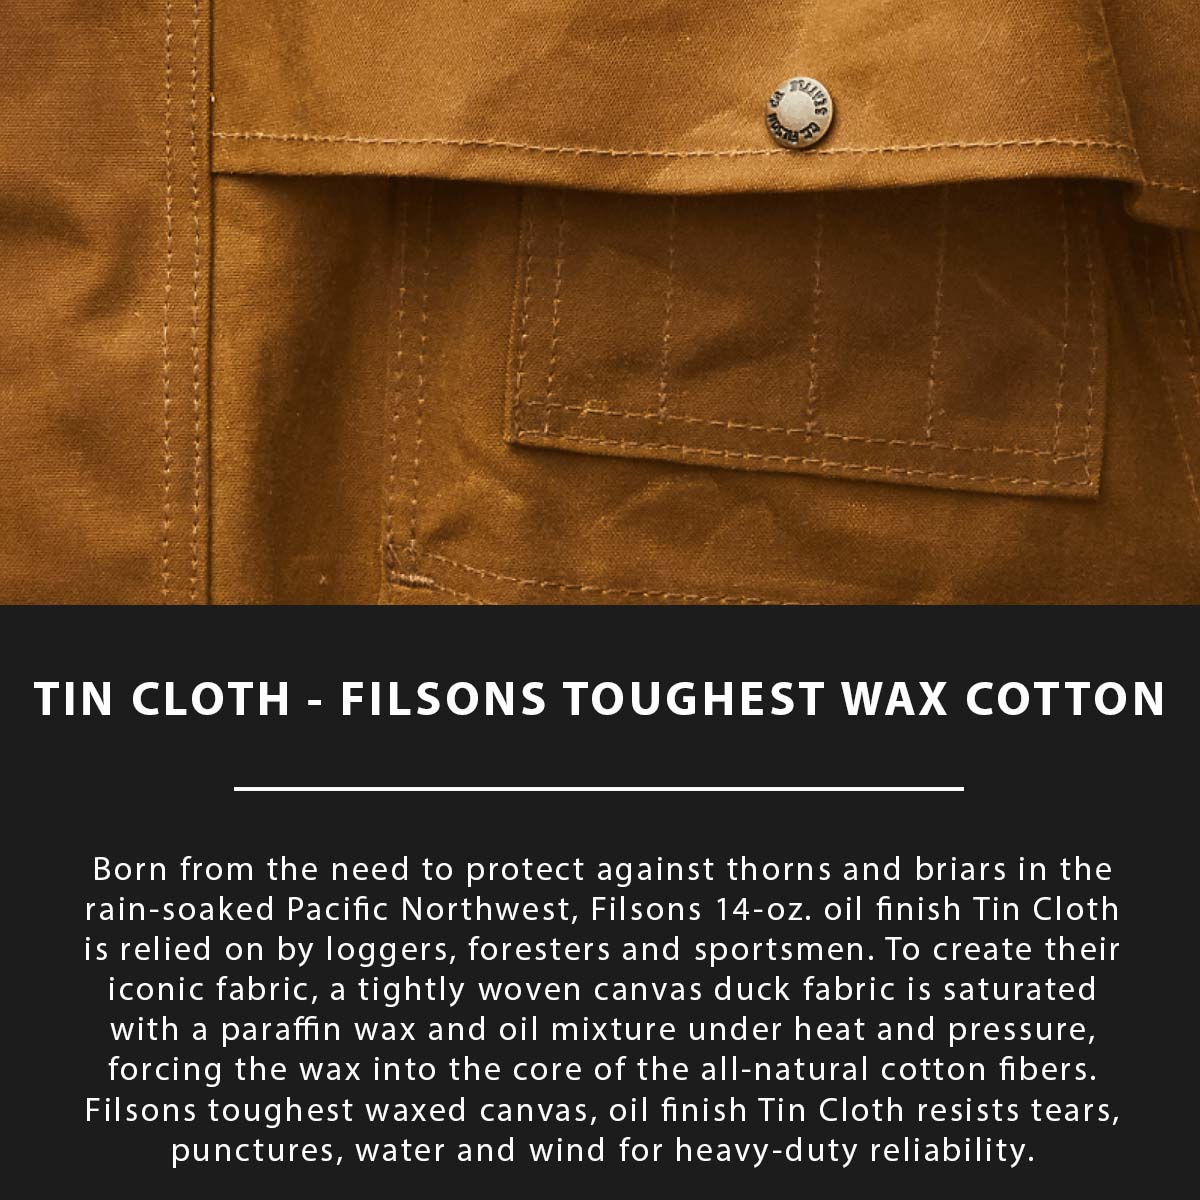 Filson Tin Cloth Insulated Packer Coat Dark Tan, made of the legendary super strong, lightweight, and oil impregnated 14-oz. Tin Cloth canvas